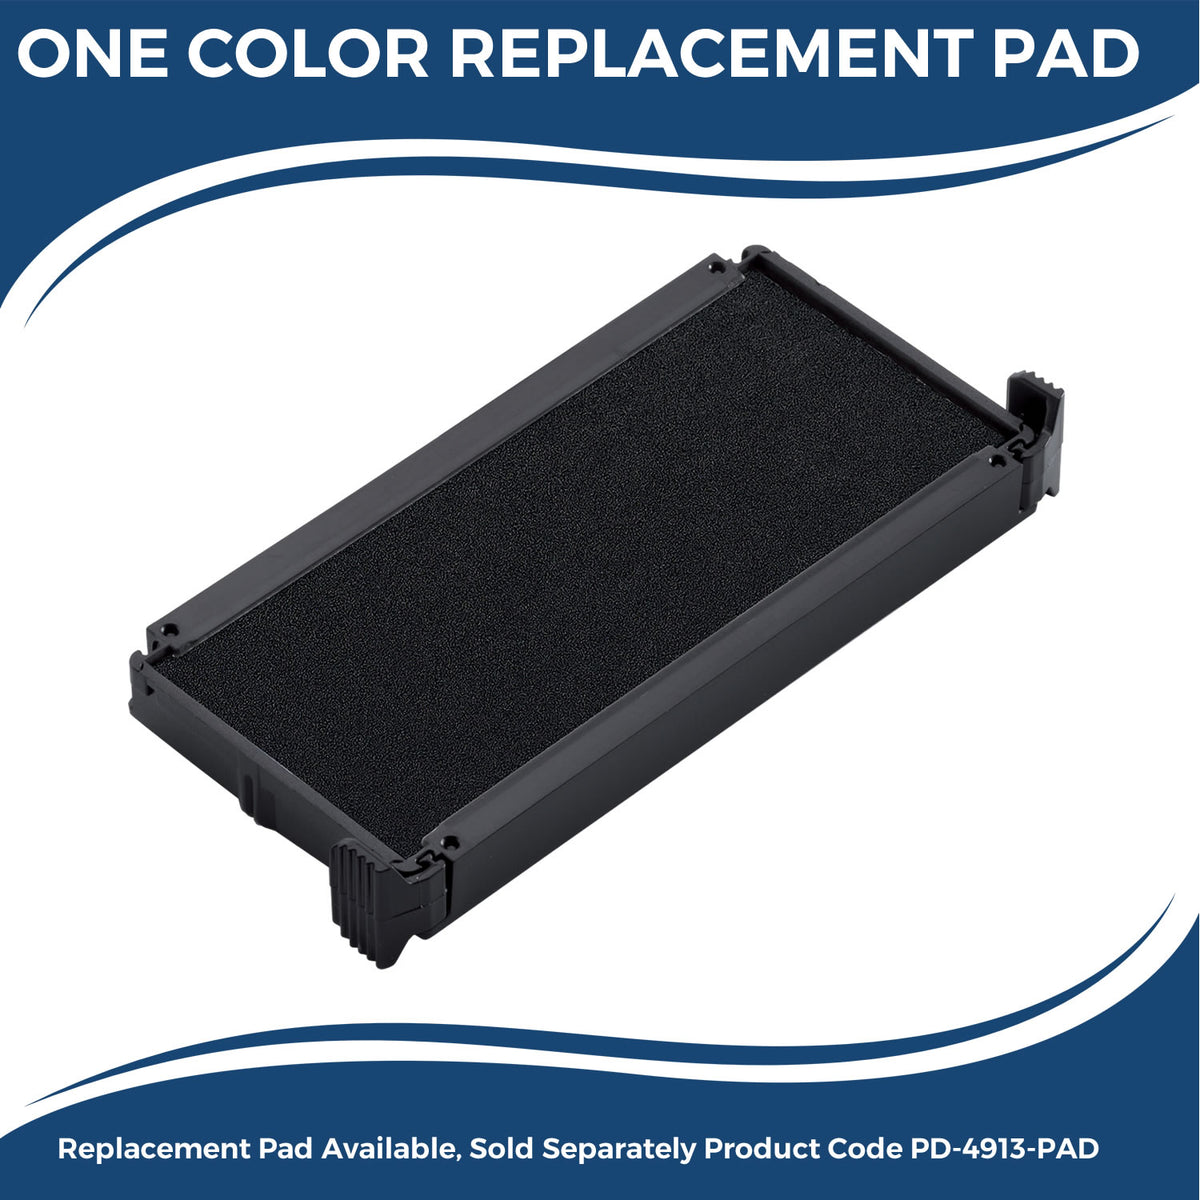 Large Self Inking Please Finish Stamp 4683S Large Replacment Pad